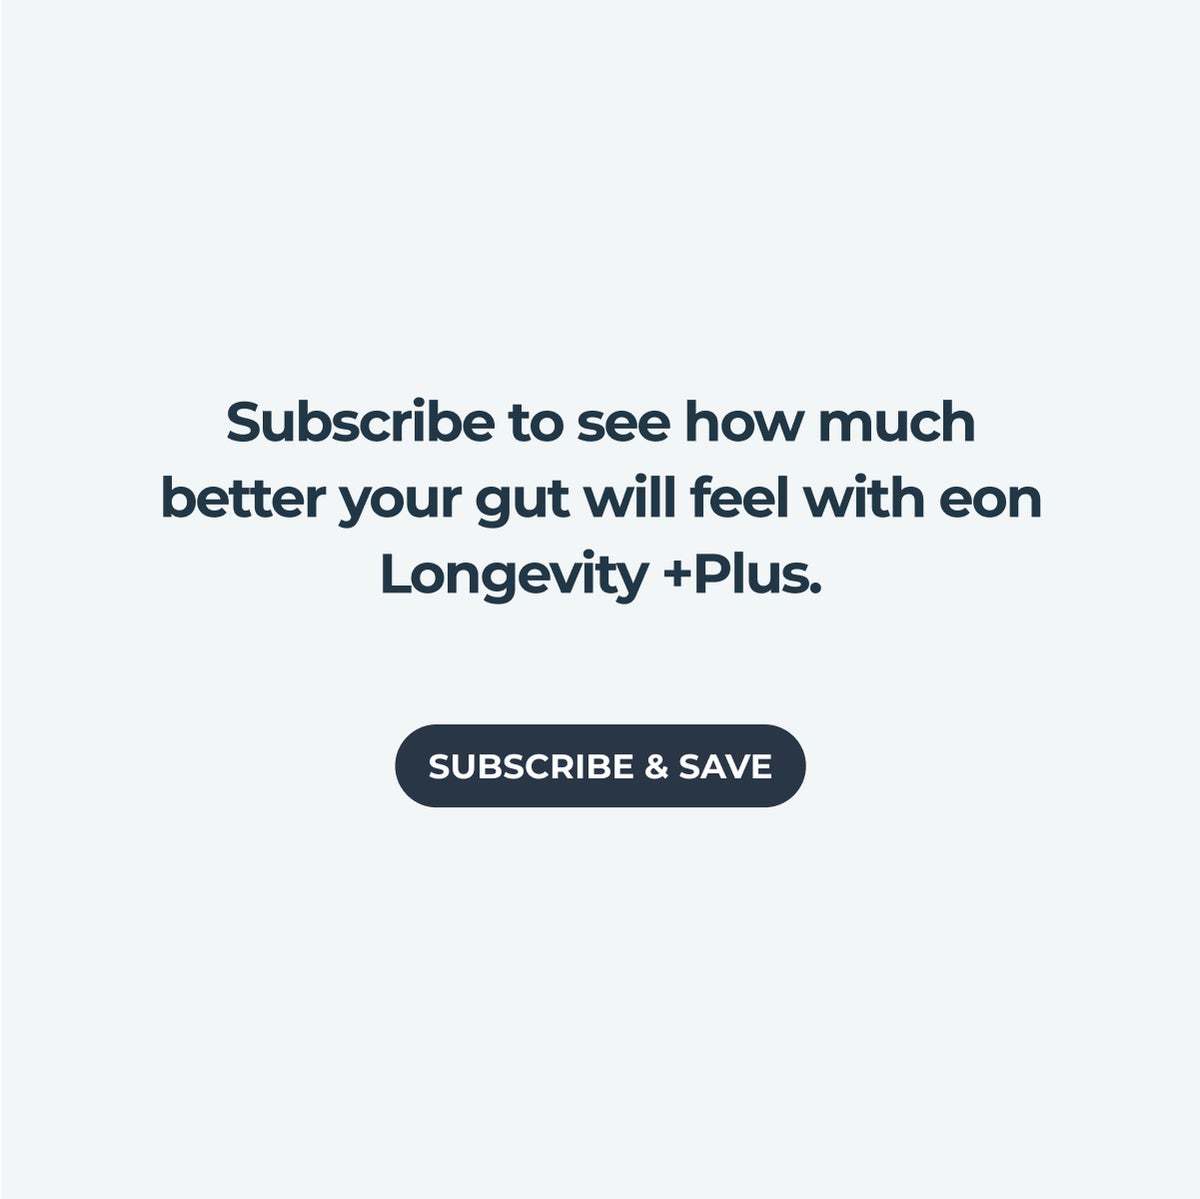 Subscribe to see how much better your gut will feel with eon Longevity +Plus